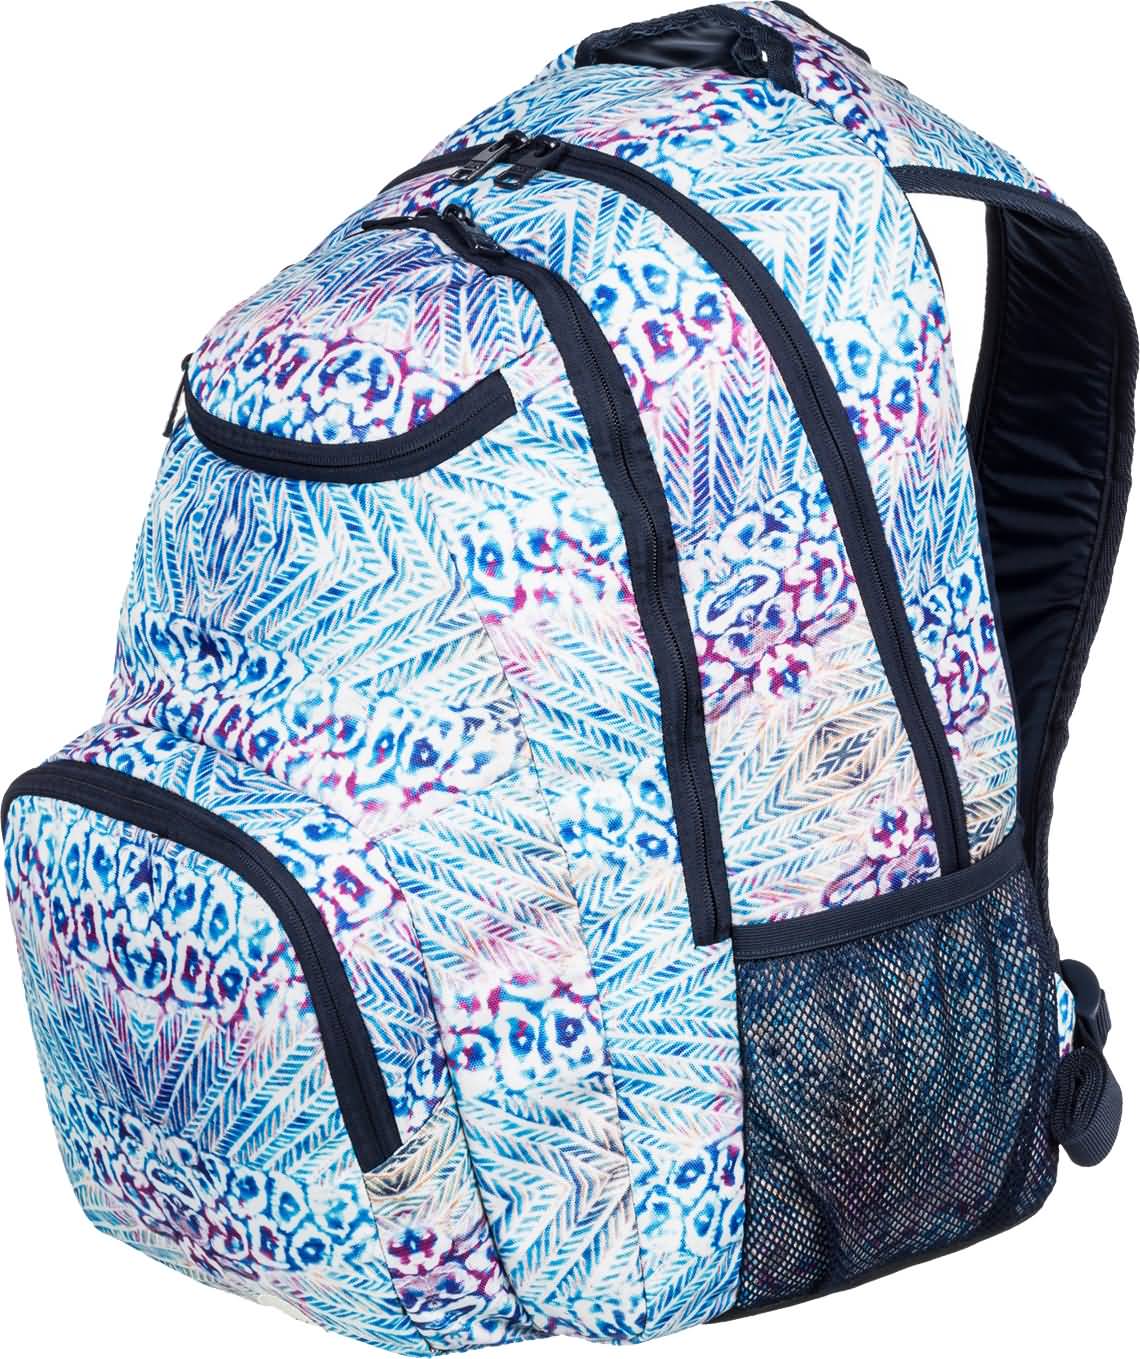 Roxy Summer 2017 Womens Beach Backpacks Collection